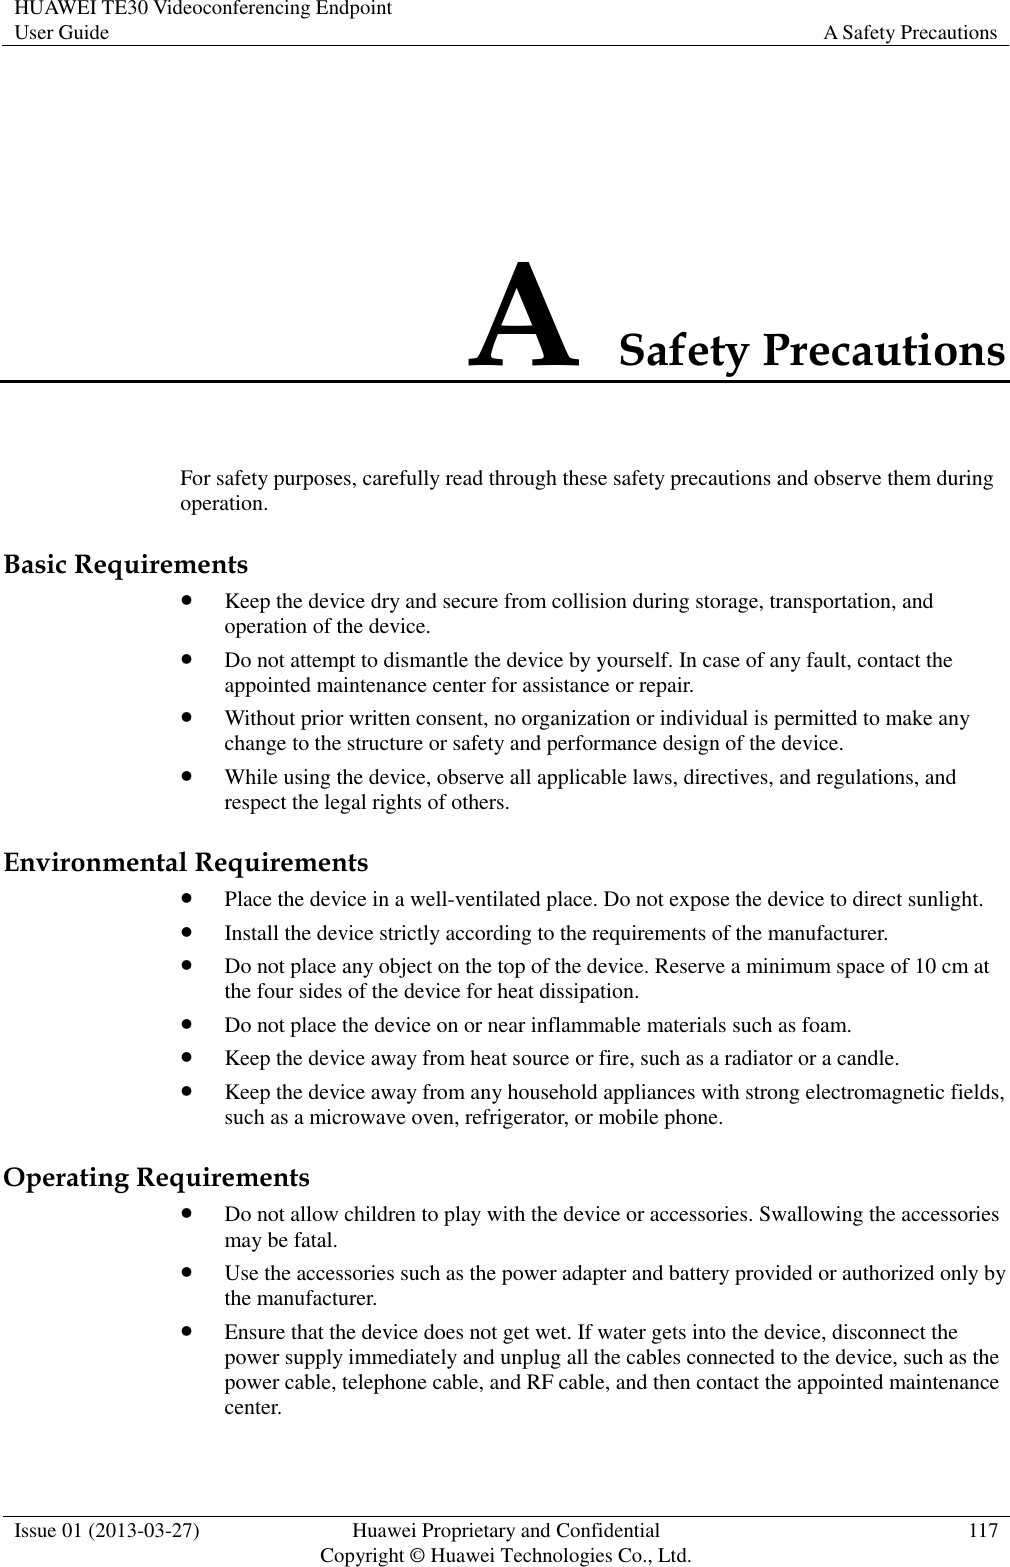 HUAWEI TE30 Videoconferencing Endpoint User Guide A Safety Precautions  Issue 01 (2013-03-27) Huawei Proprietary and Confidential                                     Copyright © Huawei Technologies Co., Ltd. 117  A Safety Precautions For safety purposes, carefully read through these safety precautions and observe them during operation. Basic Requirements  Keep the device dry and secure from collision during storage, transportation, and operation of the device.  Do not attempt to dismantle the device by yourself. In case of any fault, contact the appointed maintenance center for assistance or repair.  Without prior written consent, no organization or individual is permitted to make any change to the structure or safety and performance design of the device.  While using the device, observe all applicable laws, directives, and regulations, and respect the legal rights of others. Environmental Requirements  Place the device in a well-ventilated place. Do not expose the device to direct sunlight.  Install the device strictly according to the requirements of the manufacturer.  Do not place any object on the top of the device. Reserve a minimum space of 10 cm at the four sides of the device for heat dissipation.  Do not place the device on or near inflammable materials such as foam.  Keep the device away from heat source or fire, such as a radiator or a candle.  Keep the device away from any household appliances with strong electromagnetic fields, such as a microwave oven, refrigerator, or mobile phone. Operating Requirements  Do not allow children to play with the device or accessories. Swallowing the accessories may be fatal.  Use the accessories such as the power adapter and battery provided or authorized only by the manufacturer.  Ensure that the device does not get wet. If water gets into the device, disconnect the power supply immediately and unplug all the cables connected to the device, such as the power cable, telephone cable, and RF cable, and then contact the appointed maintenance center. 